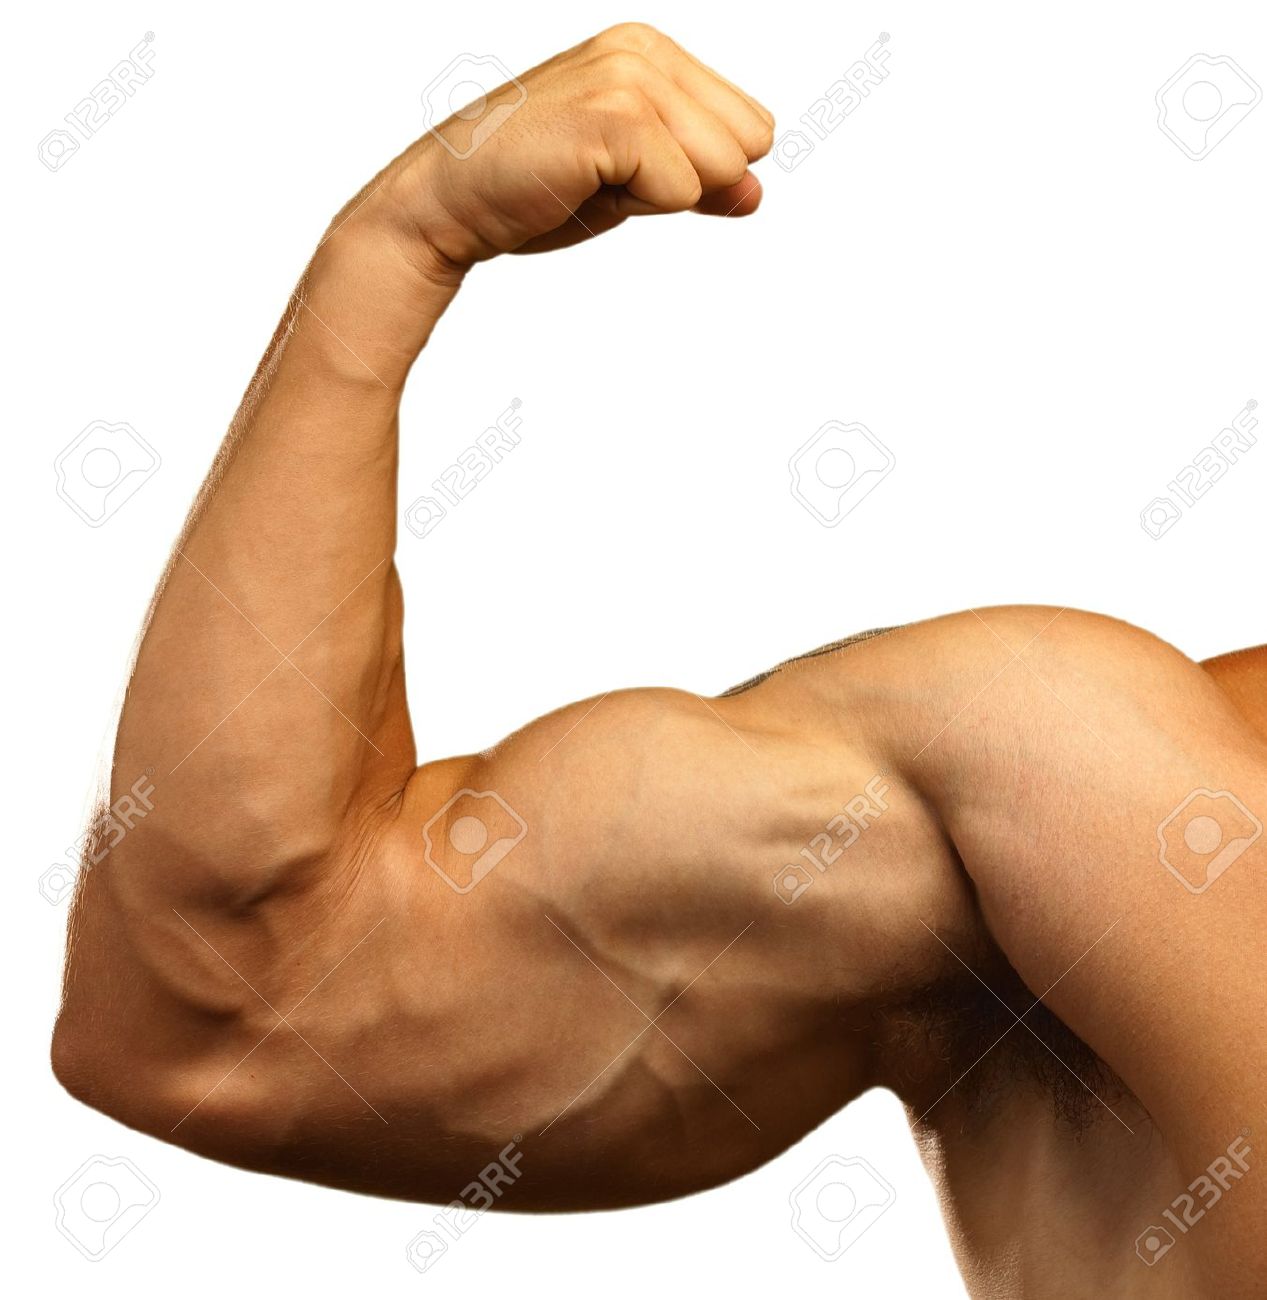 Muscle Arm PNG HD - 140347